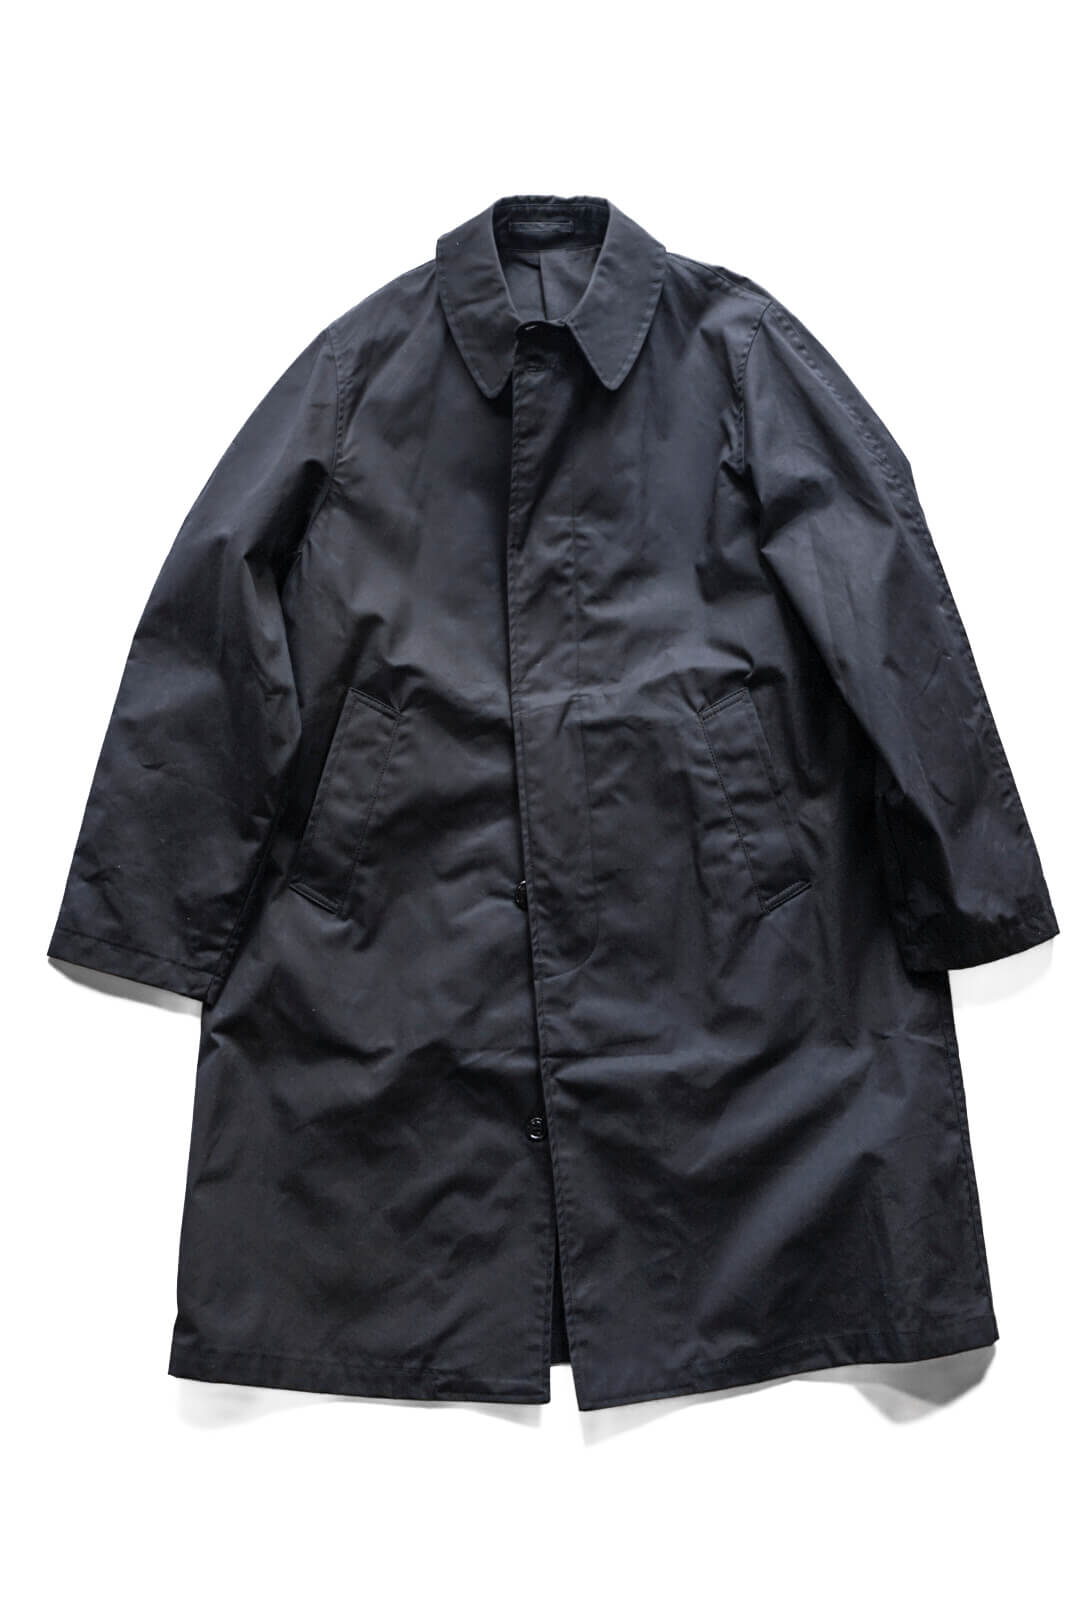 US NAVY ALL WEATHER COAT - MADE IN USA